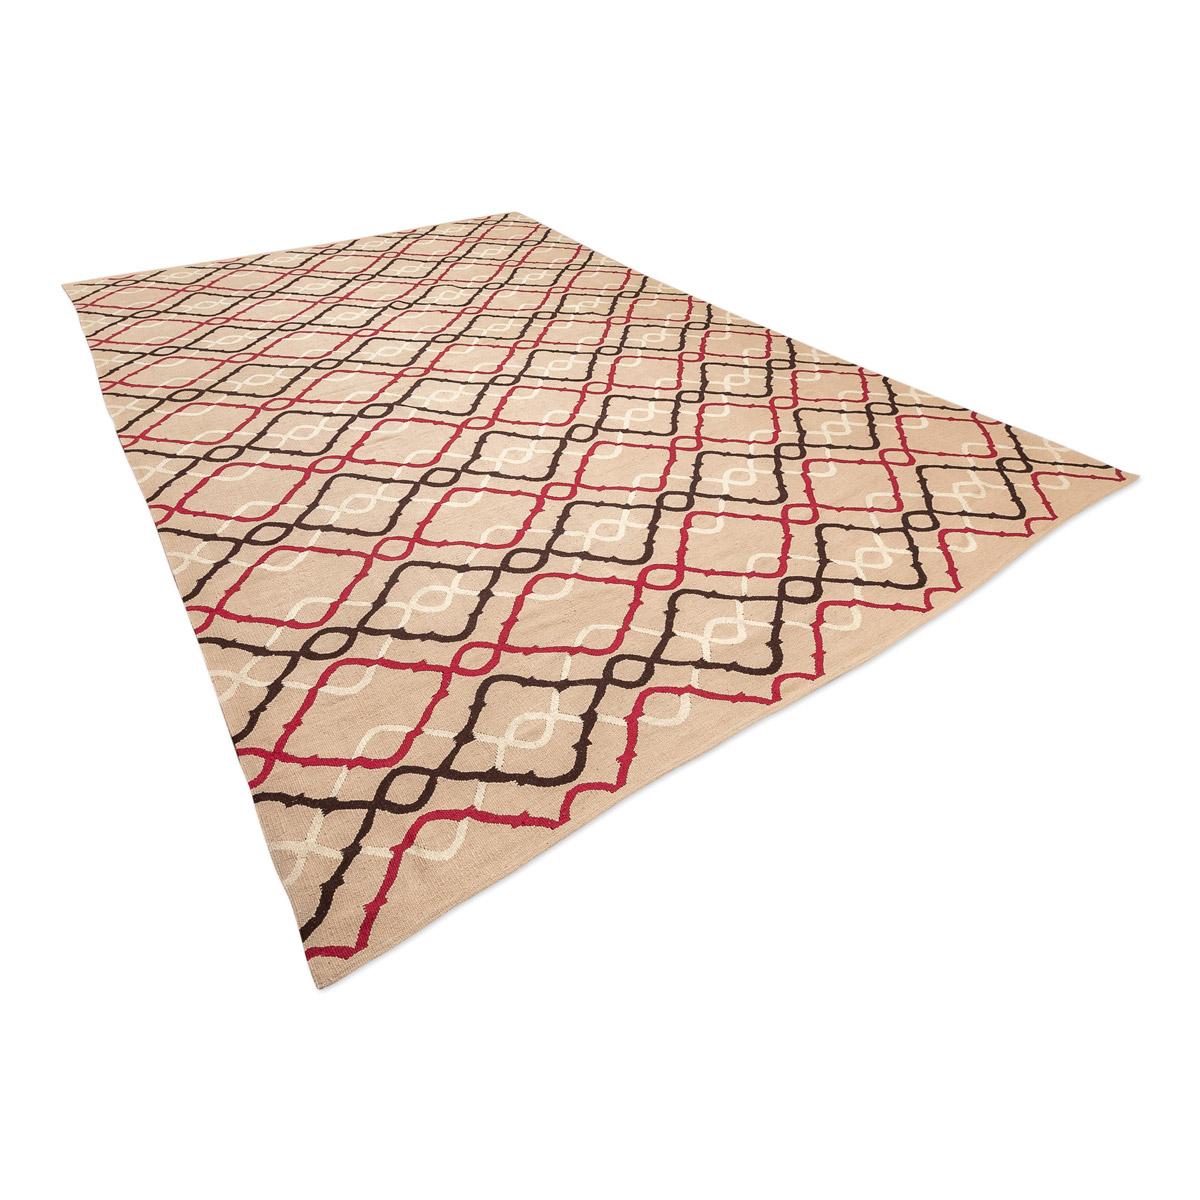 Hand-Woven Flat-Weave Rug Handmade Wool Kilim Brown and Pink. 4.05 x 3.00 m. For Sale